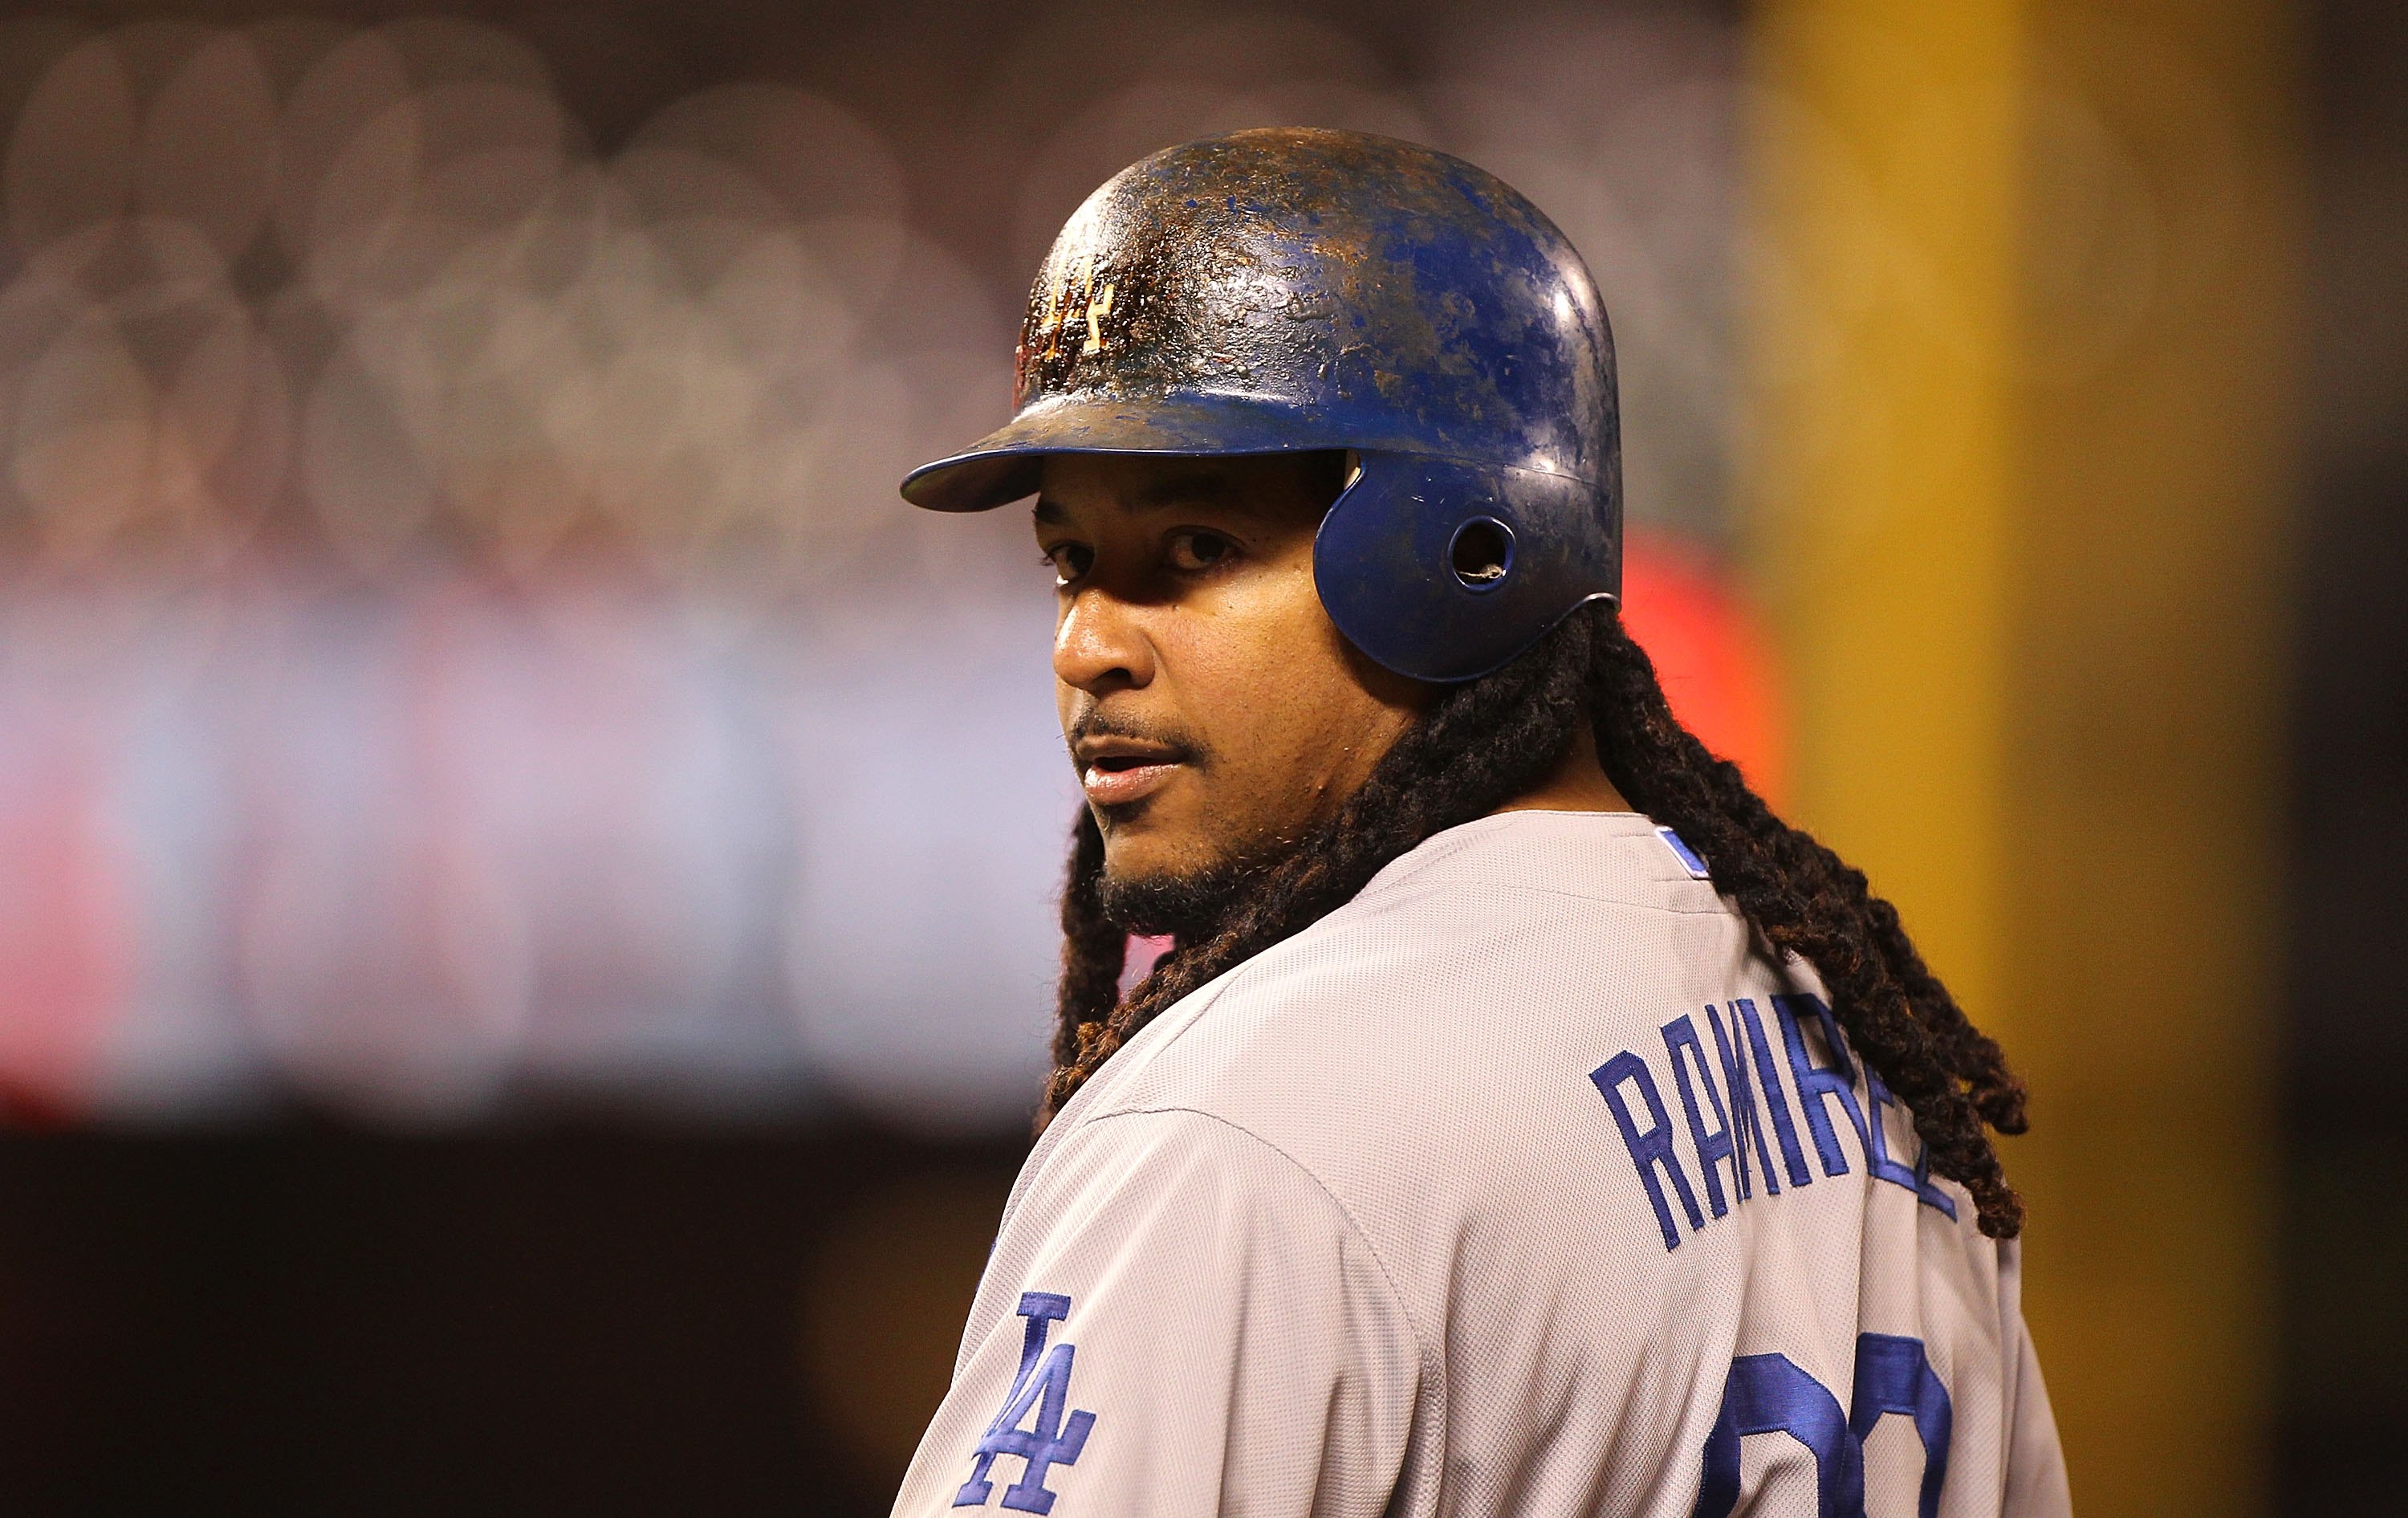 Manny Ramirez Retires: Power Ranking Manny and the Top 10 Nutjobs